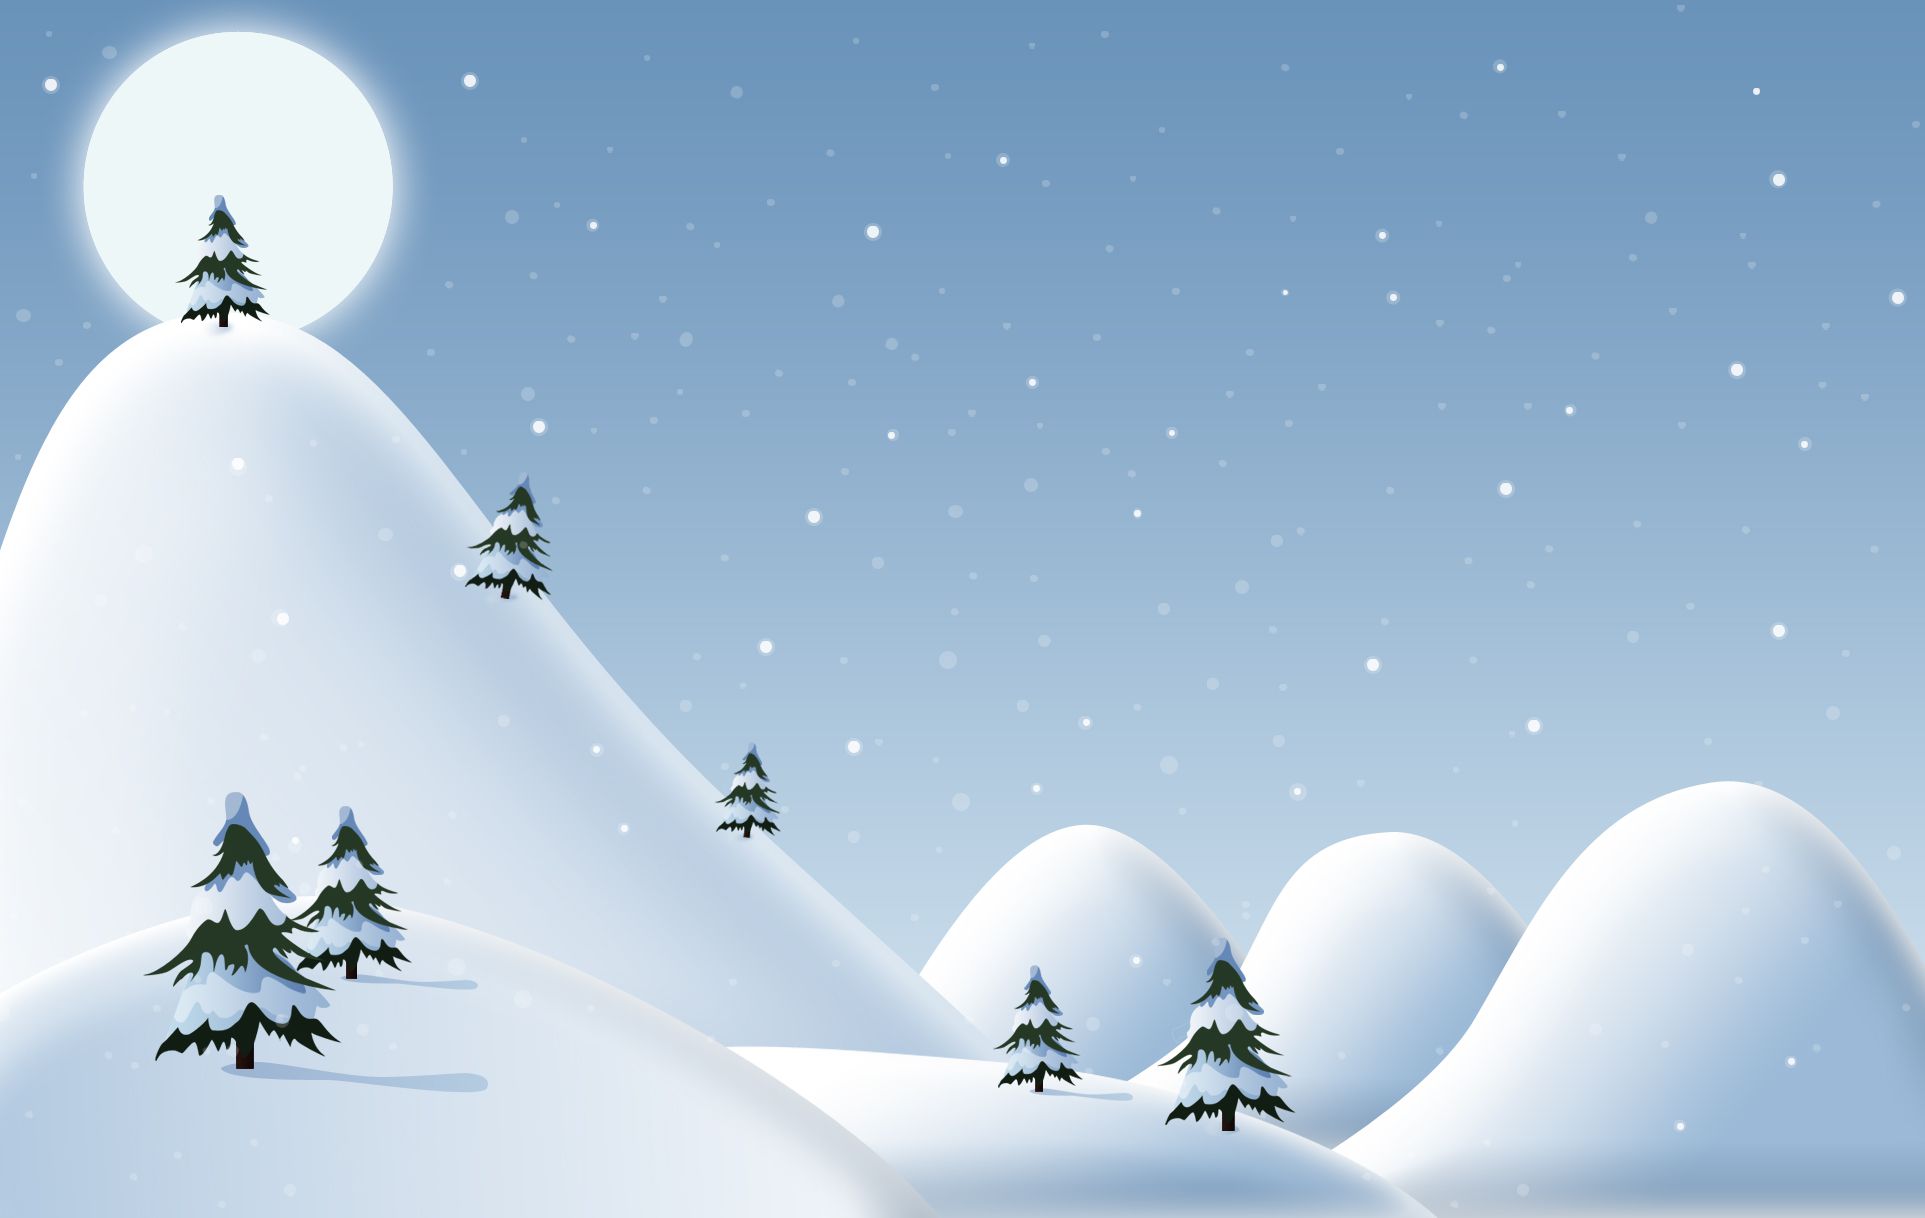 The Top Free Christmas Wallpapers